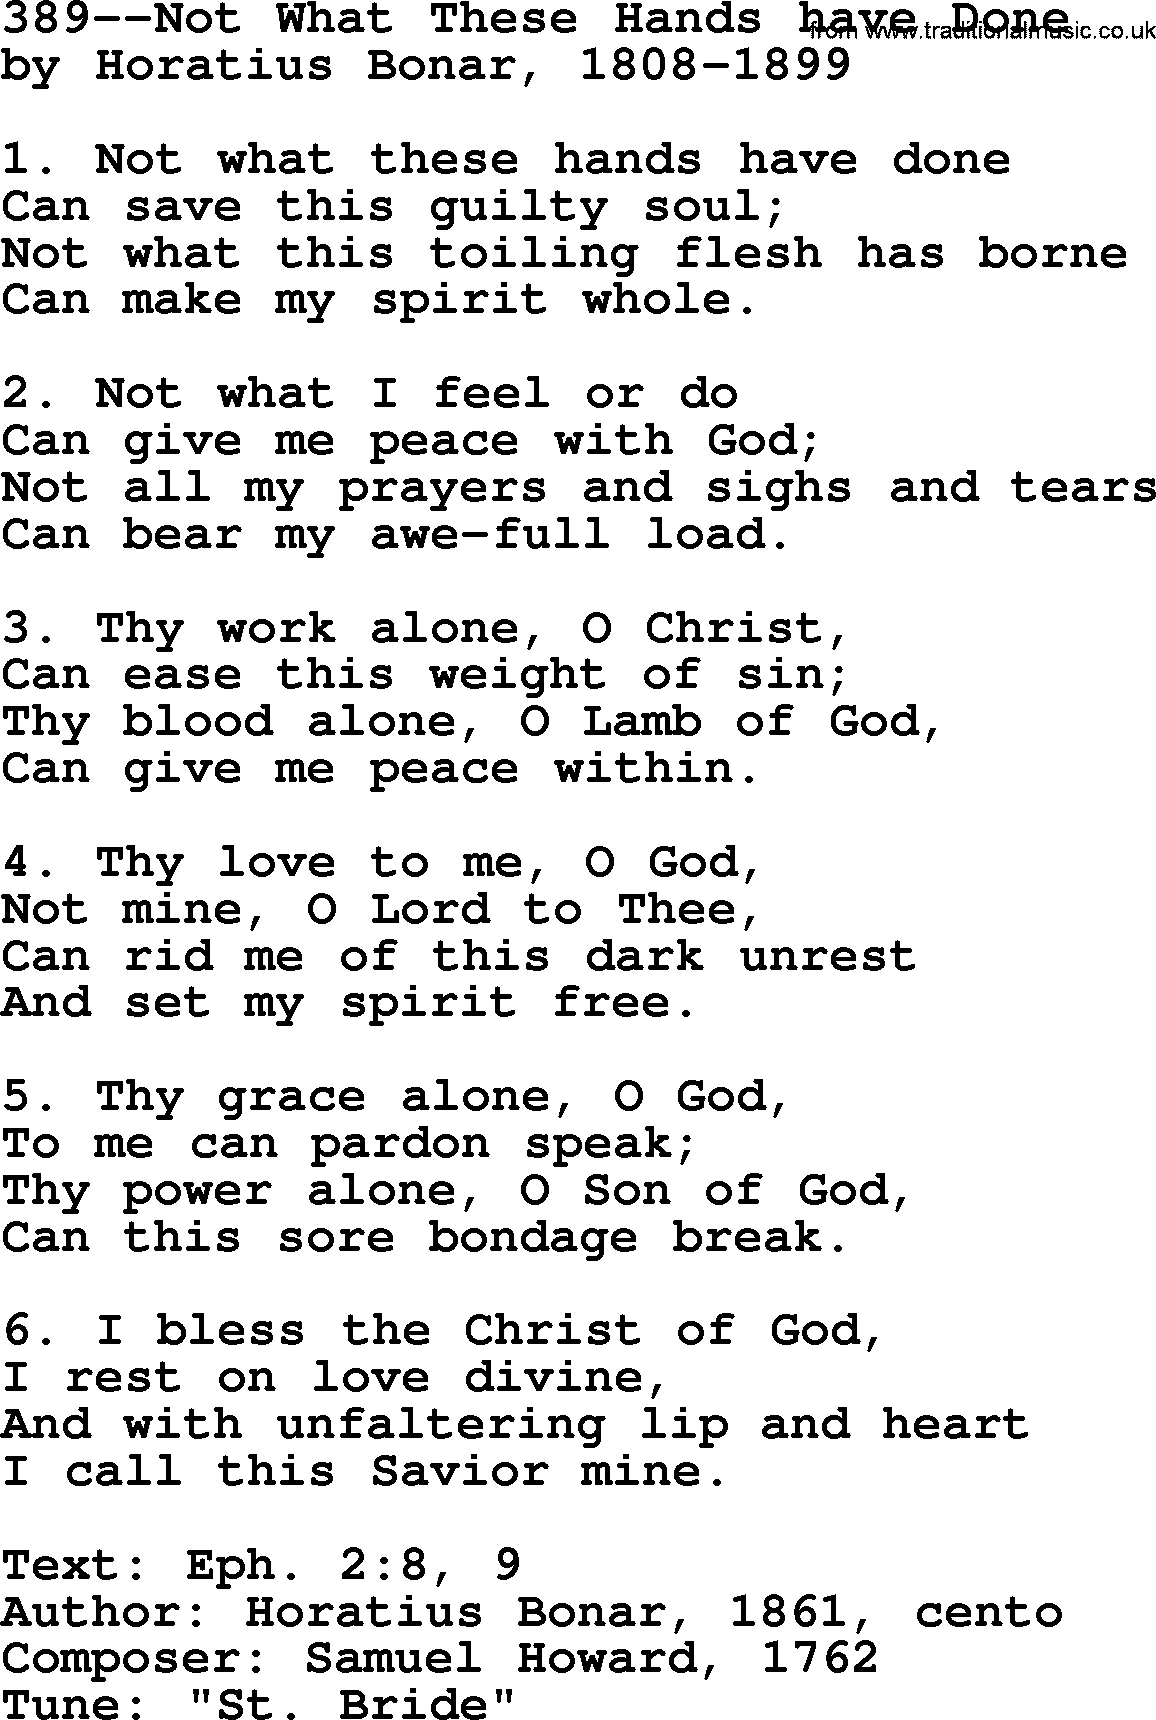 Lutheran Hymn: 389--Not What These Hands have Done.txt lyrics with PDF